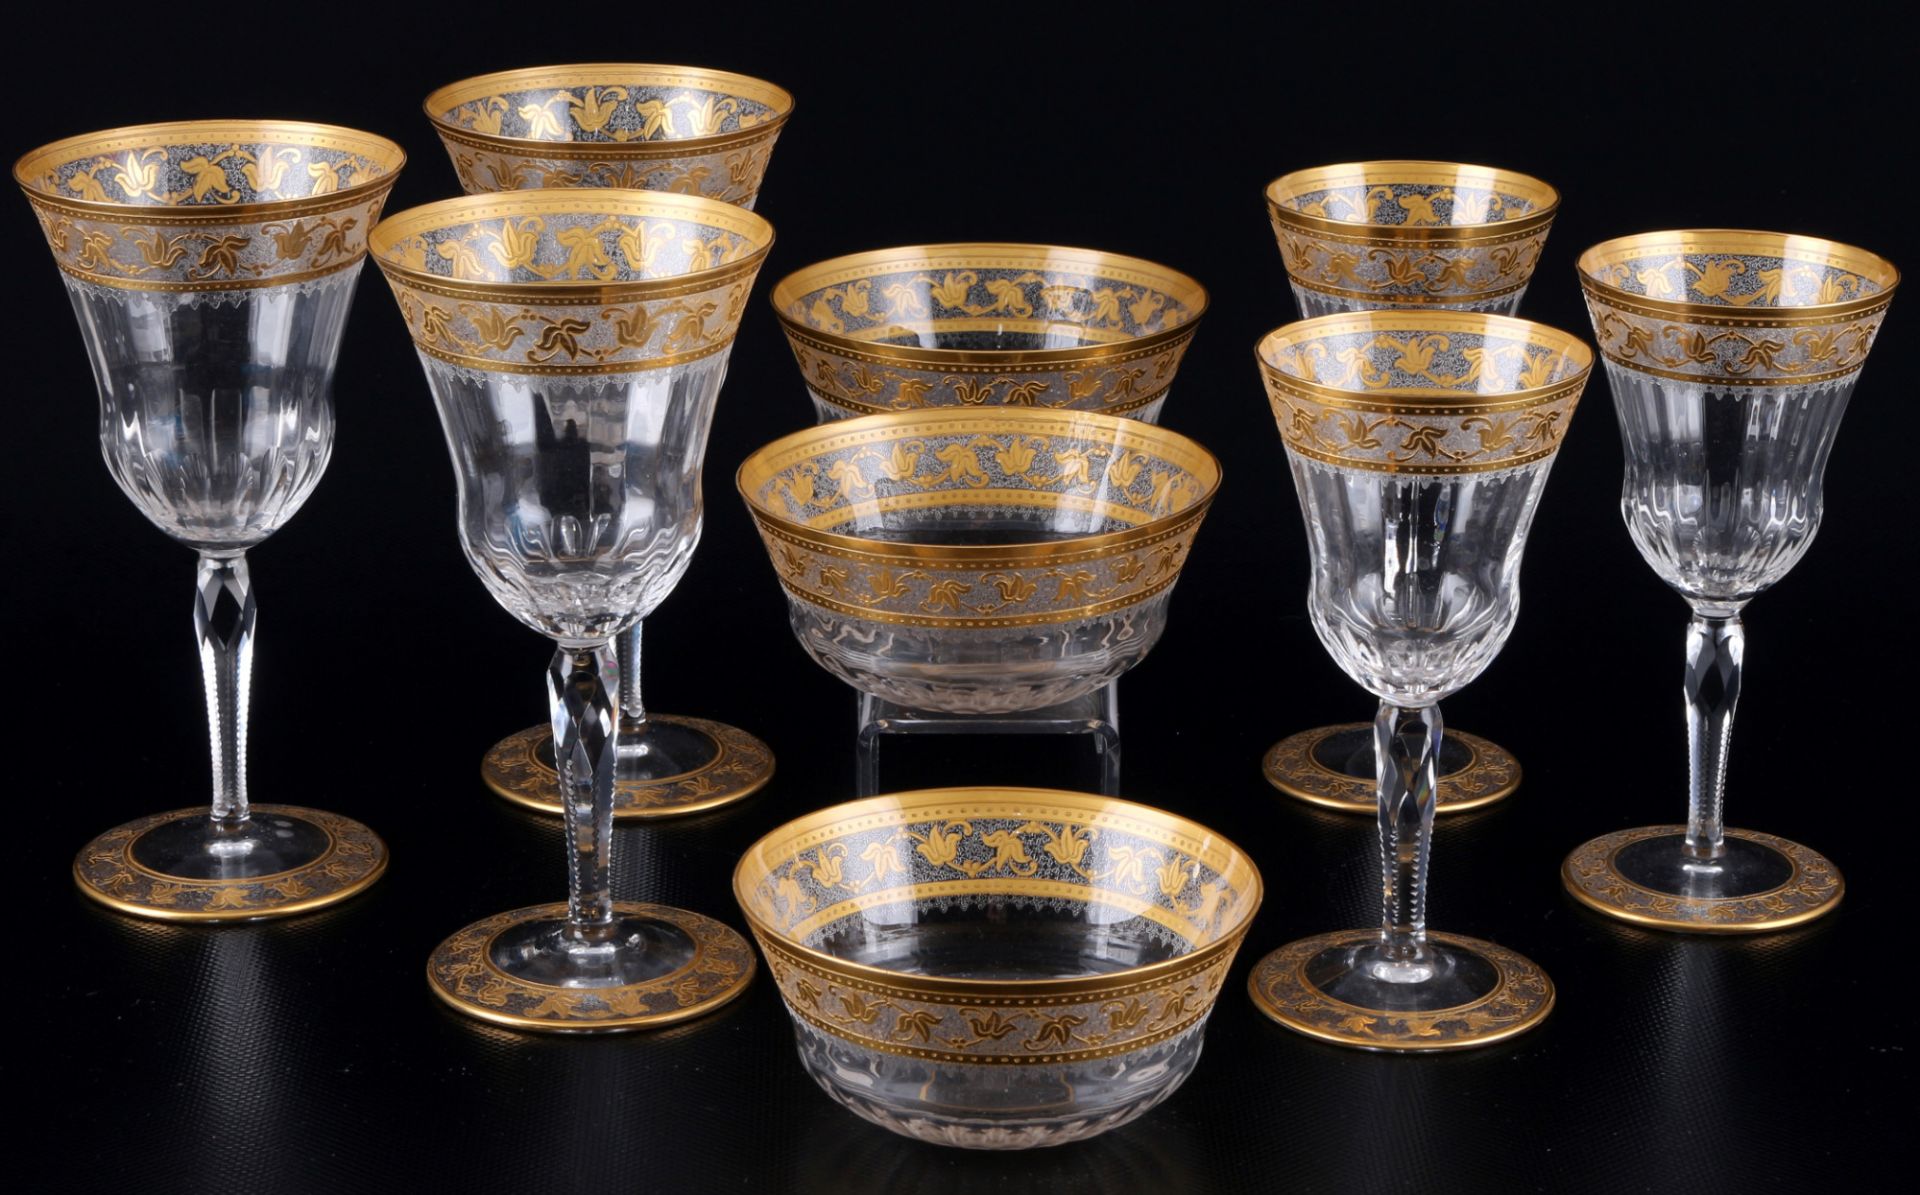 St. Louis Callot Gold glass set for 3 persons,